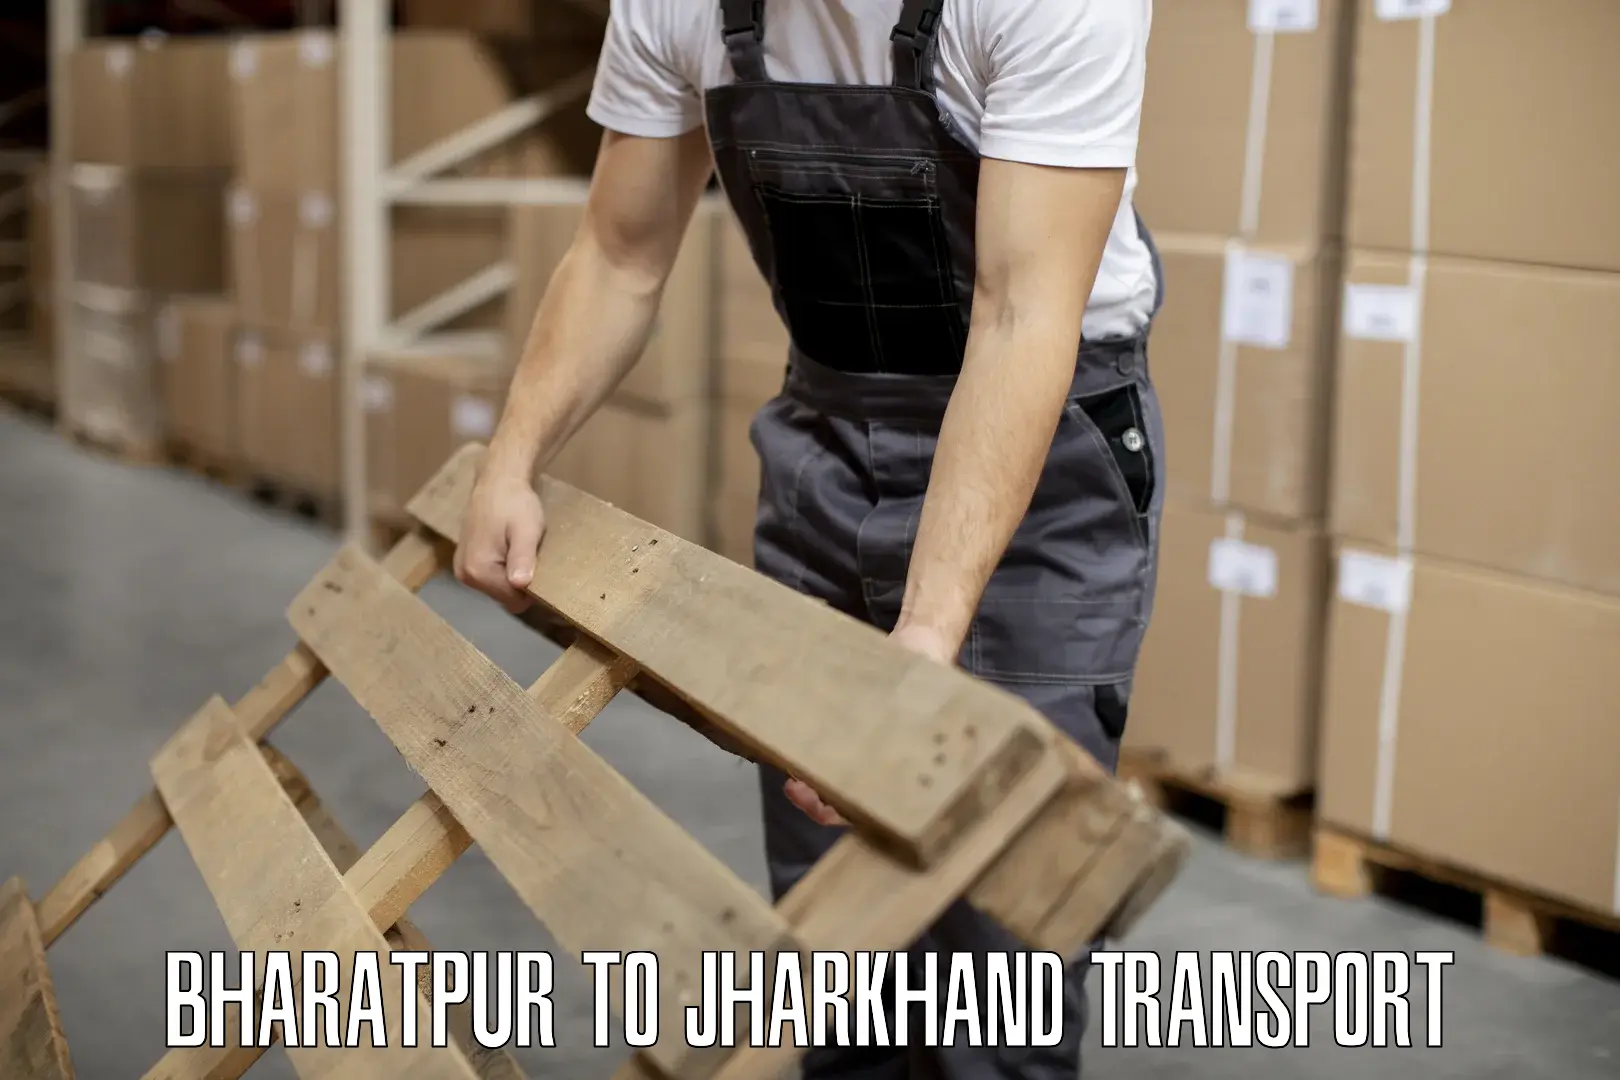 Truck transport companies in India Bharatpur to Isri